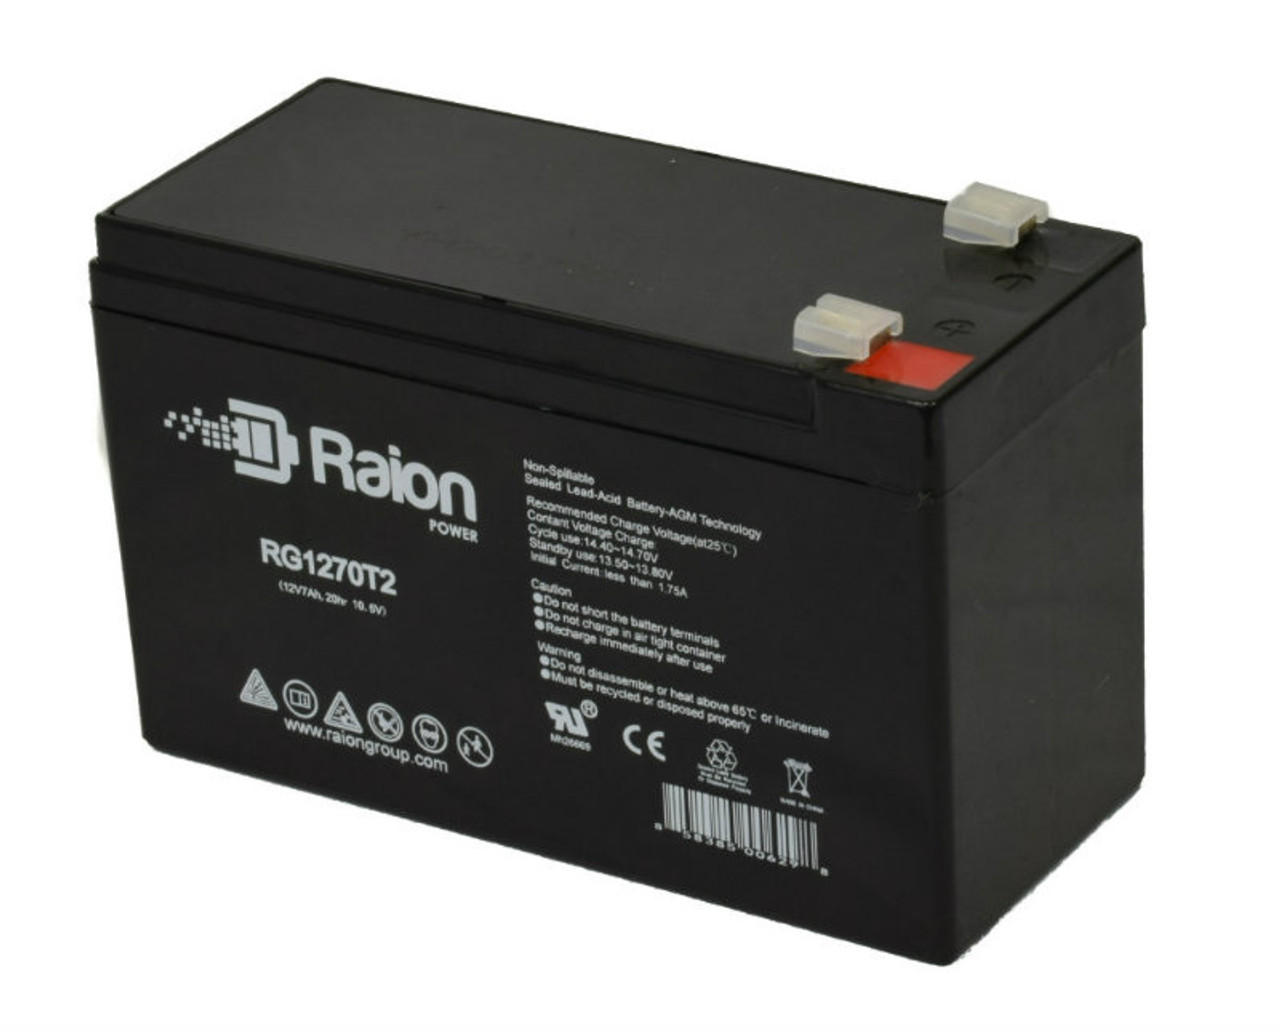 Raion Power Replacement RG1270T1 Battery for Otolift ONE Stairlift